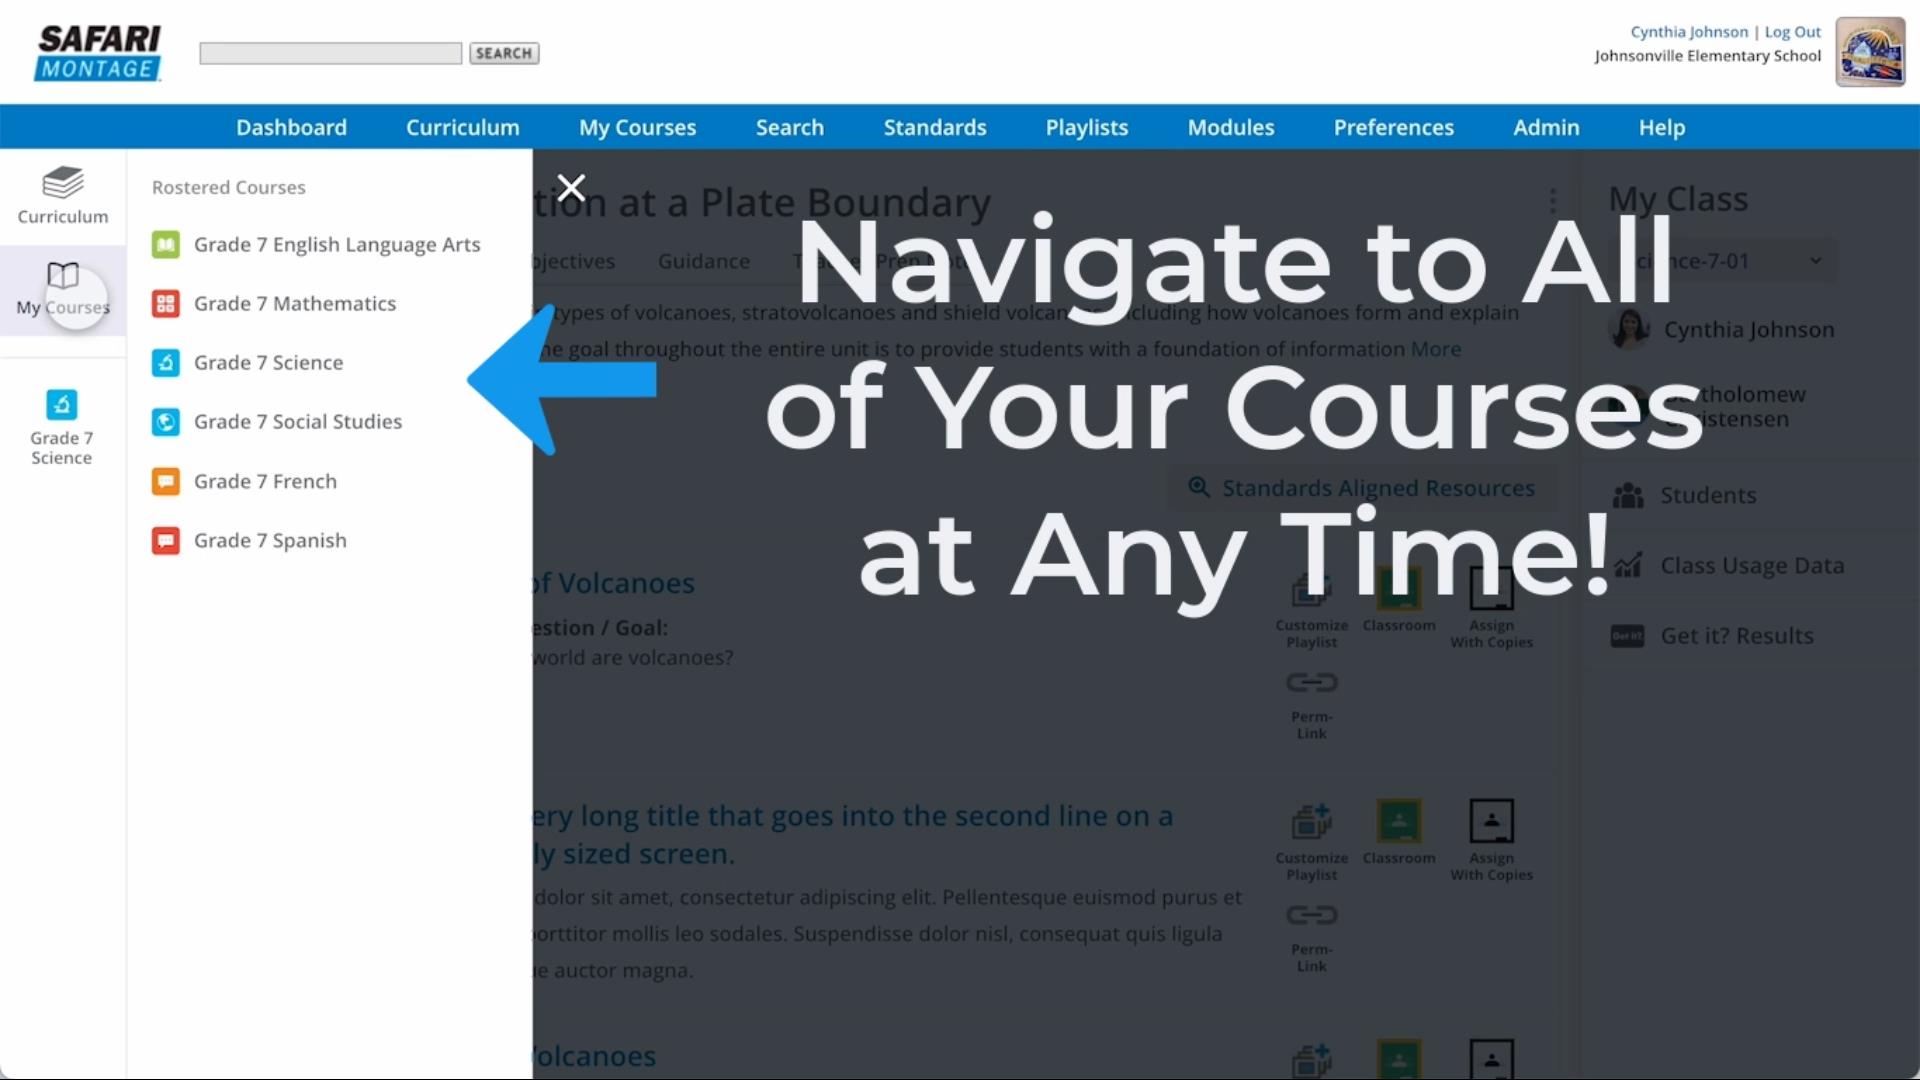 Navigate to All of Your Courses